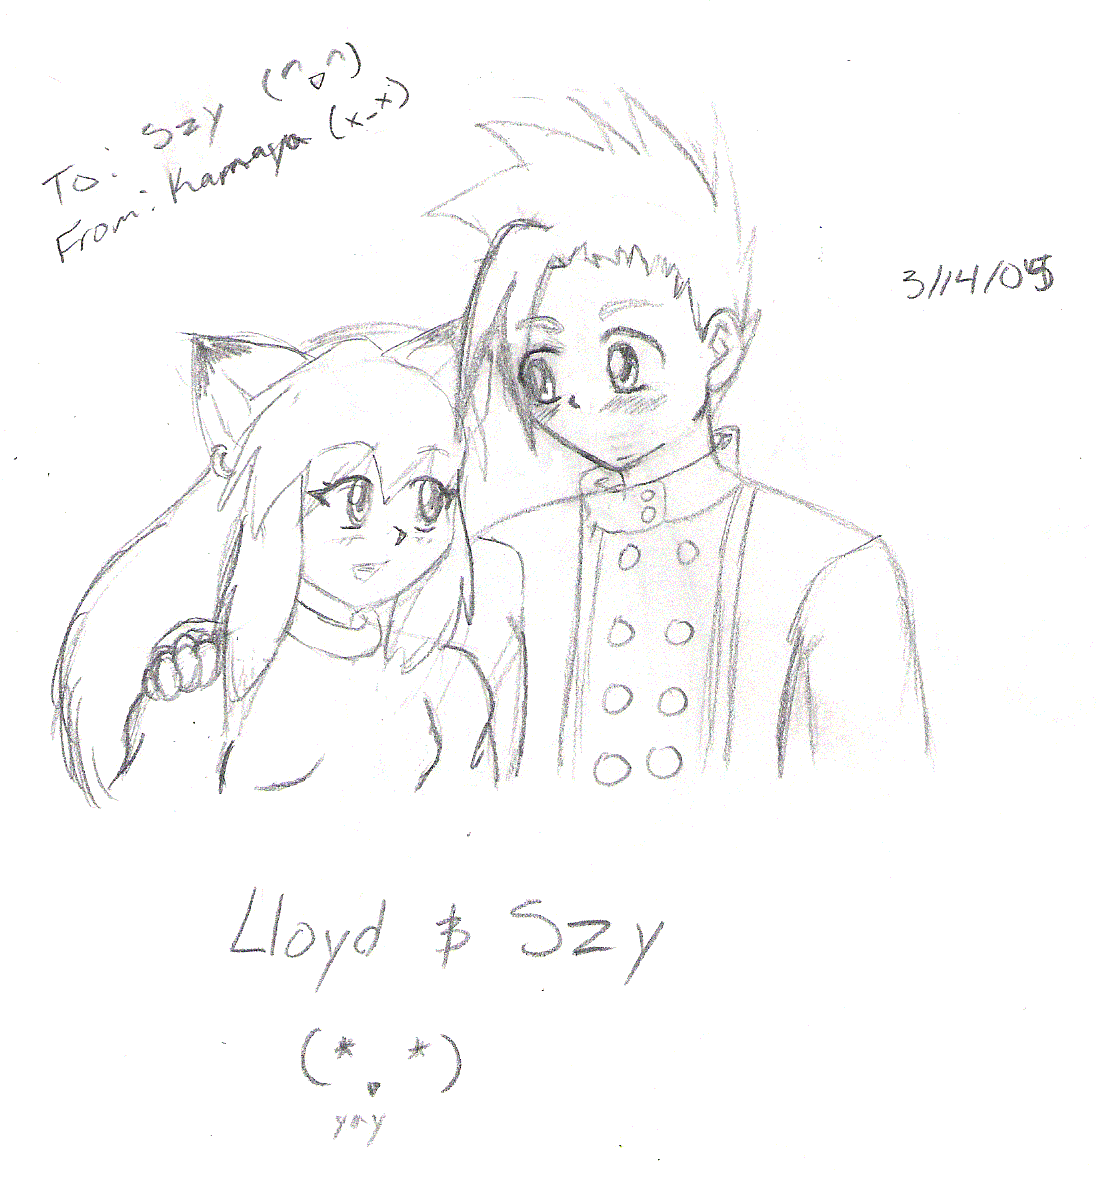 Lloyd and Szy (Szy's request) by Kamaya_the_Cat